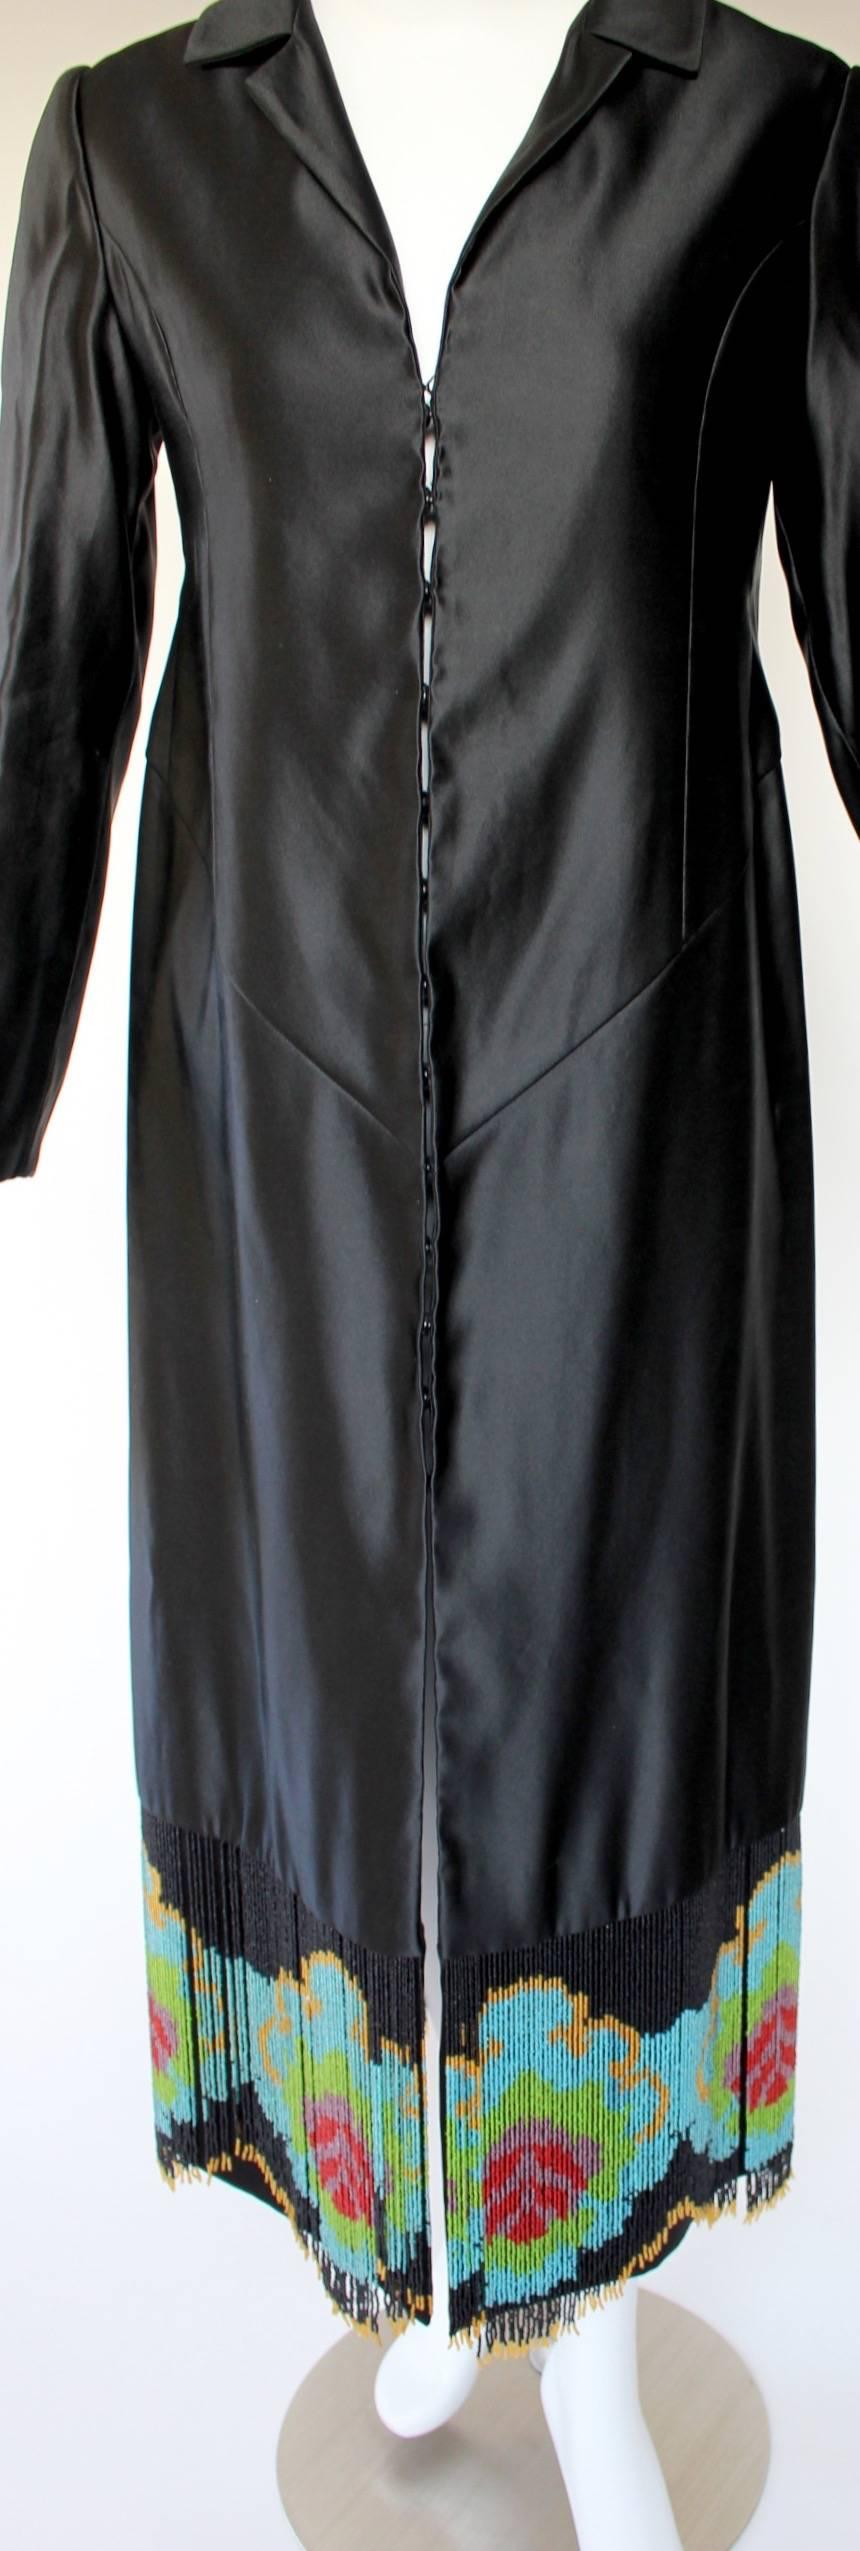 Custom Couture Black Silk Evening Dress Coat with Antique French Beaded Trim  4